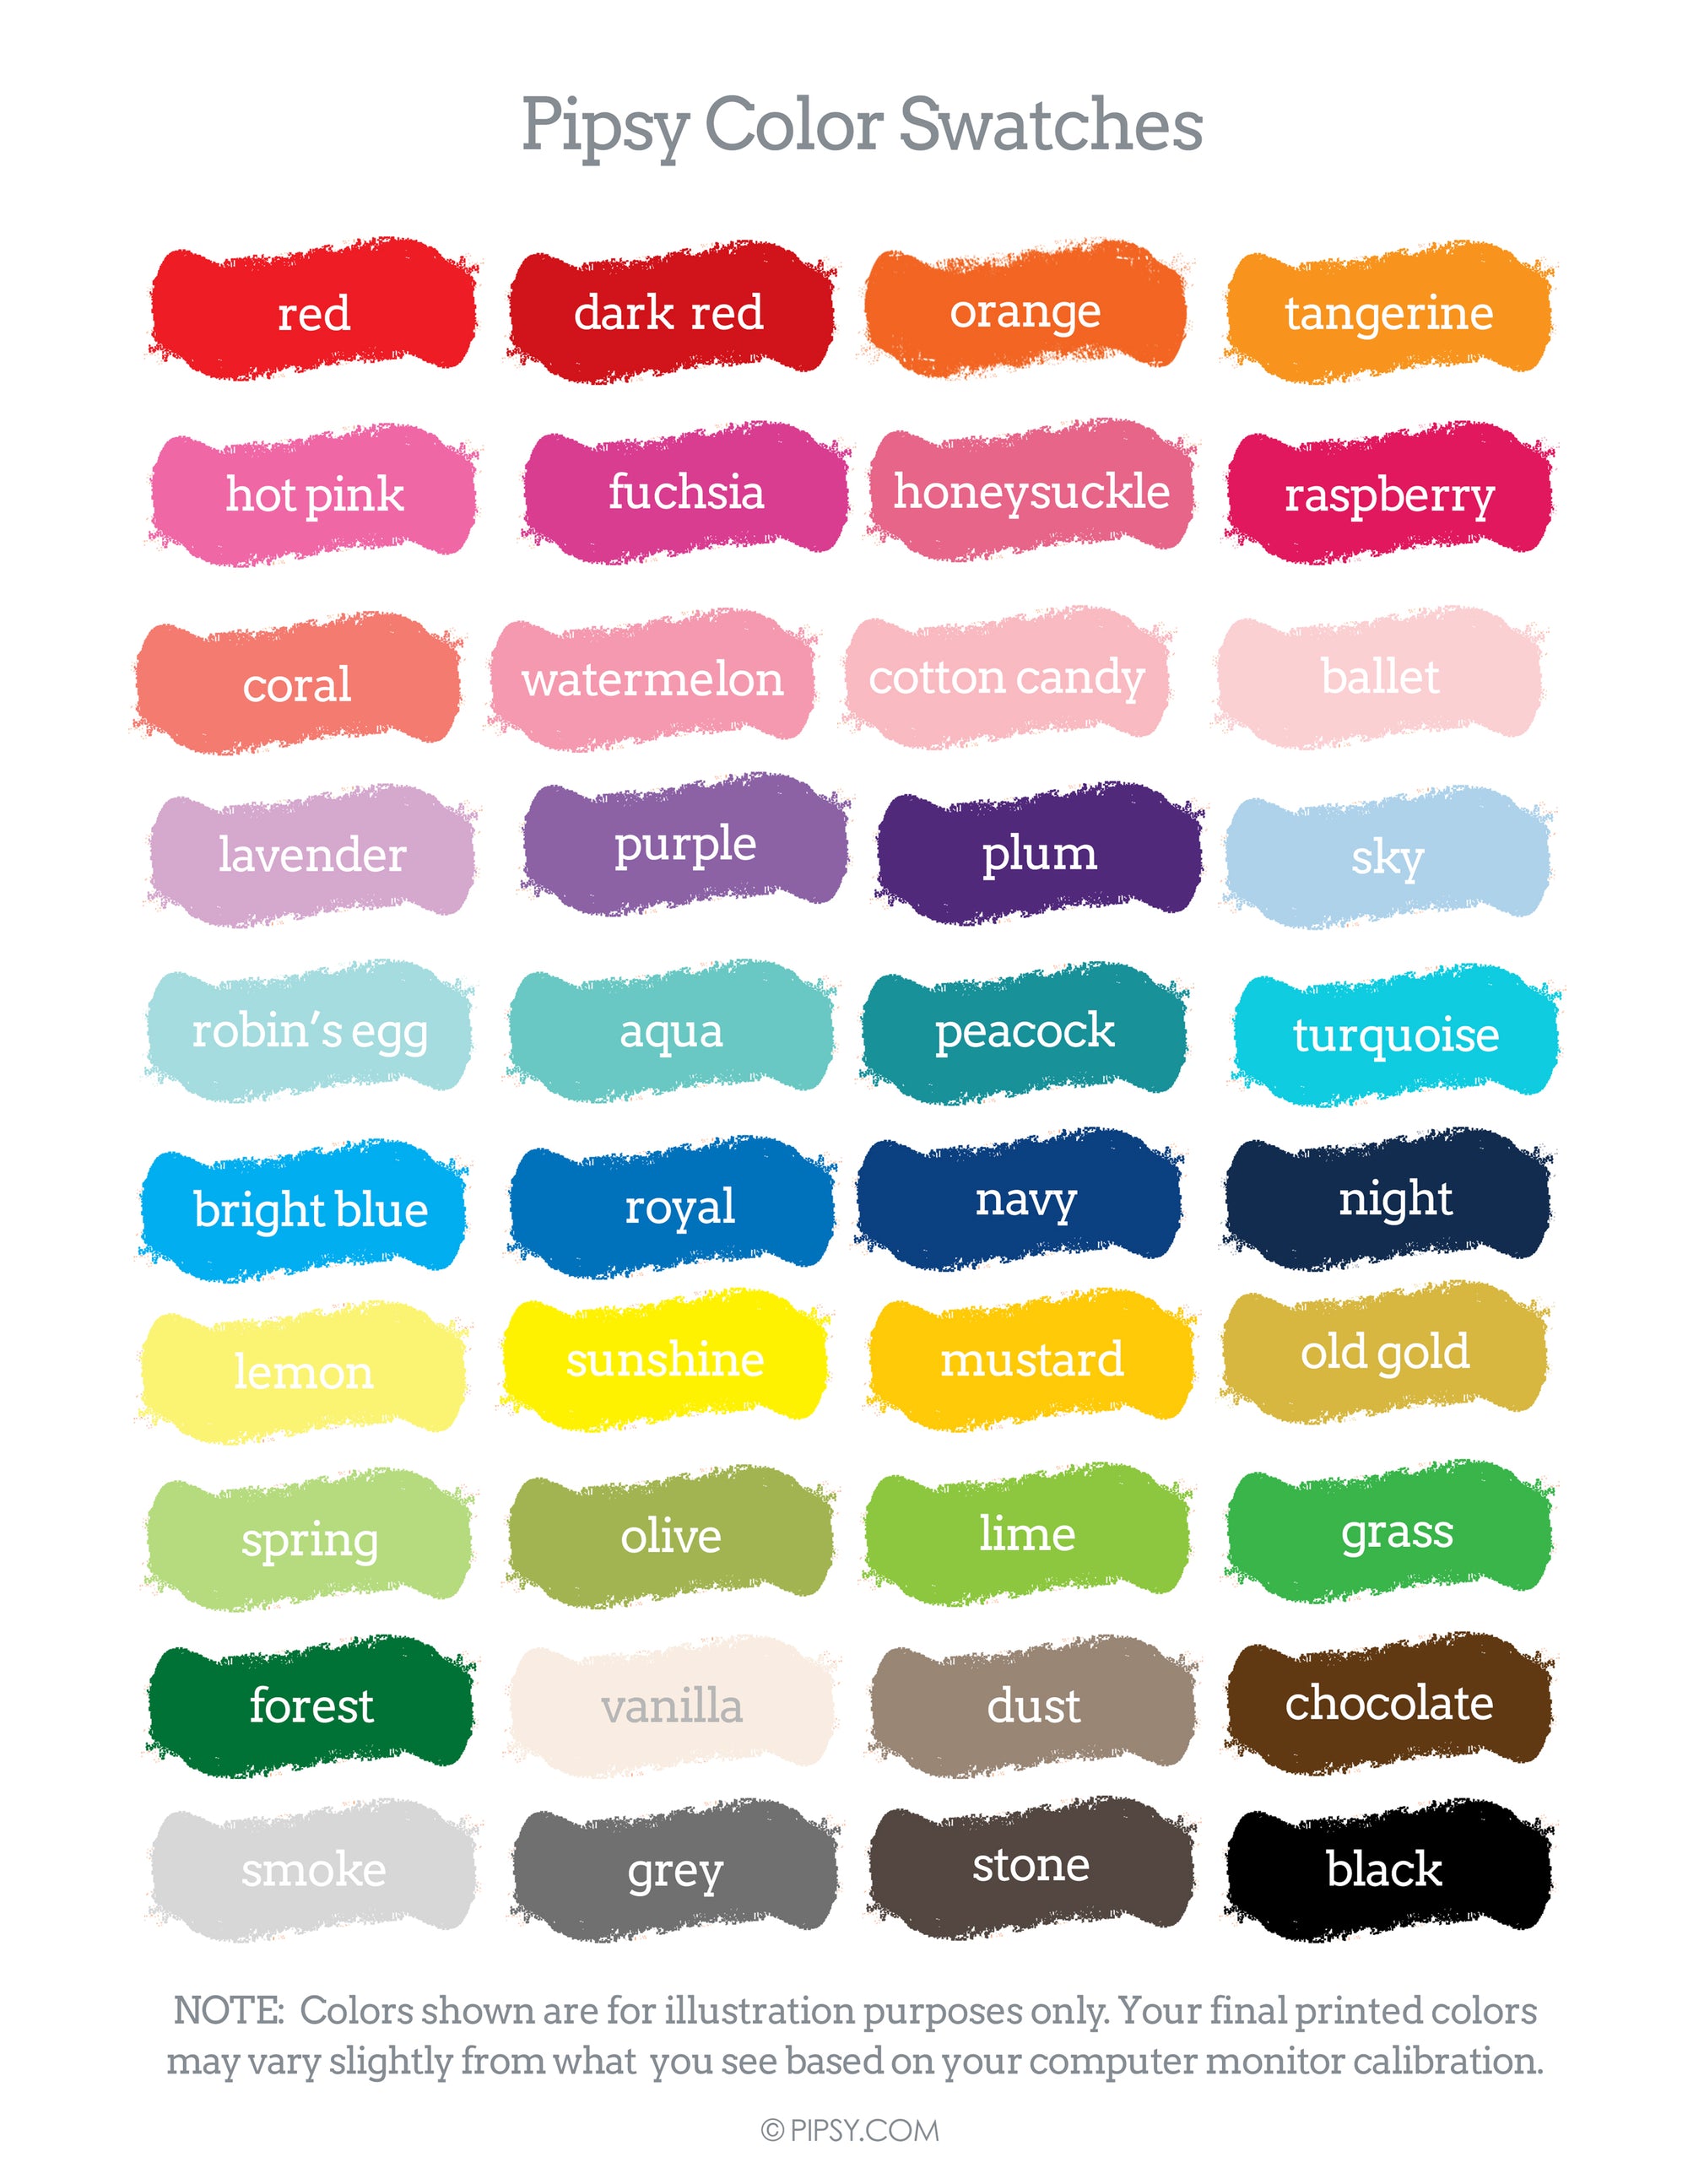 Customize your colors - Pipsy.com